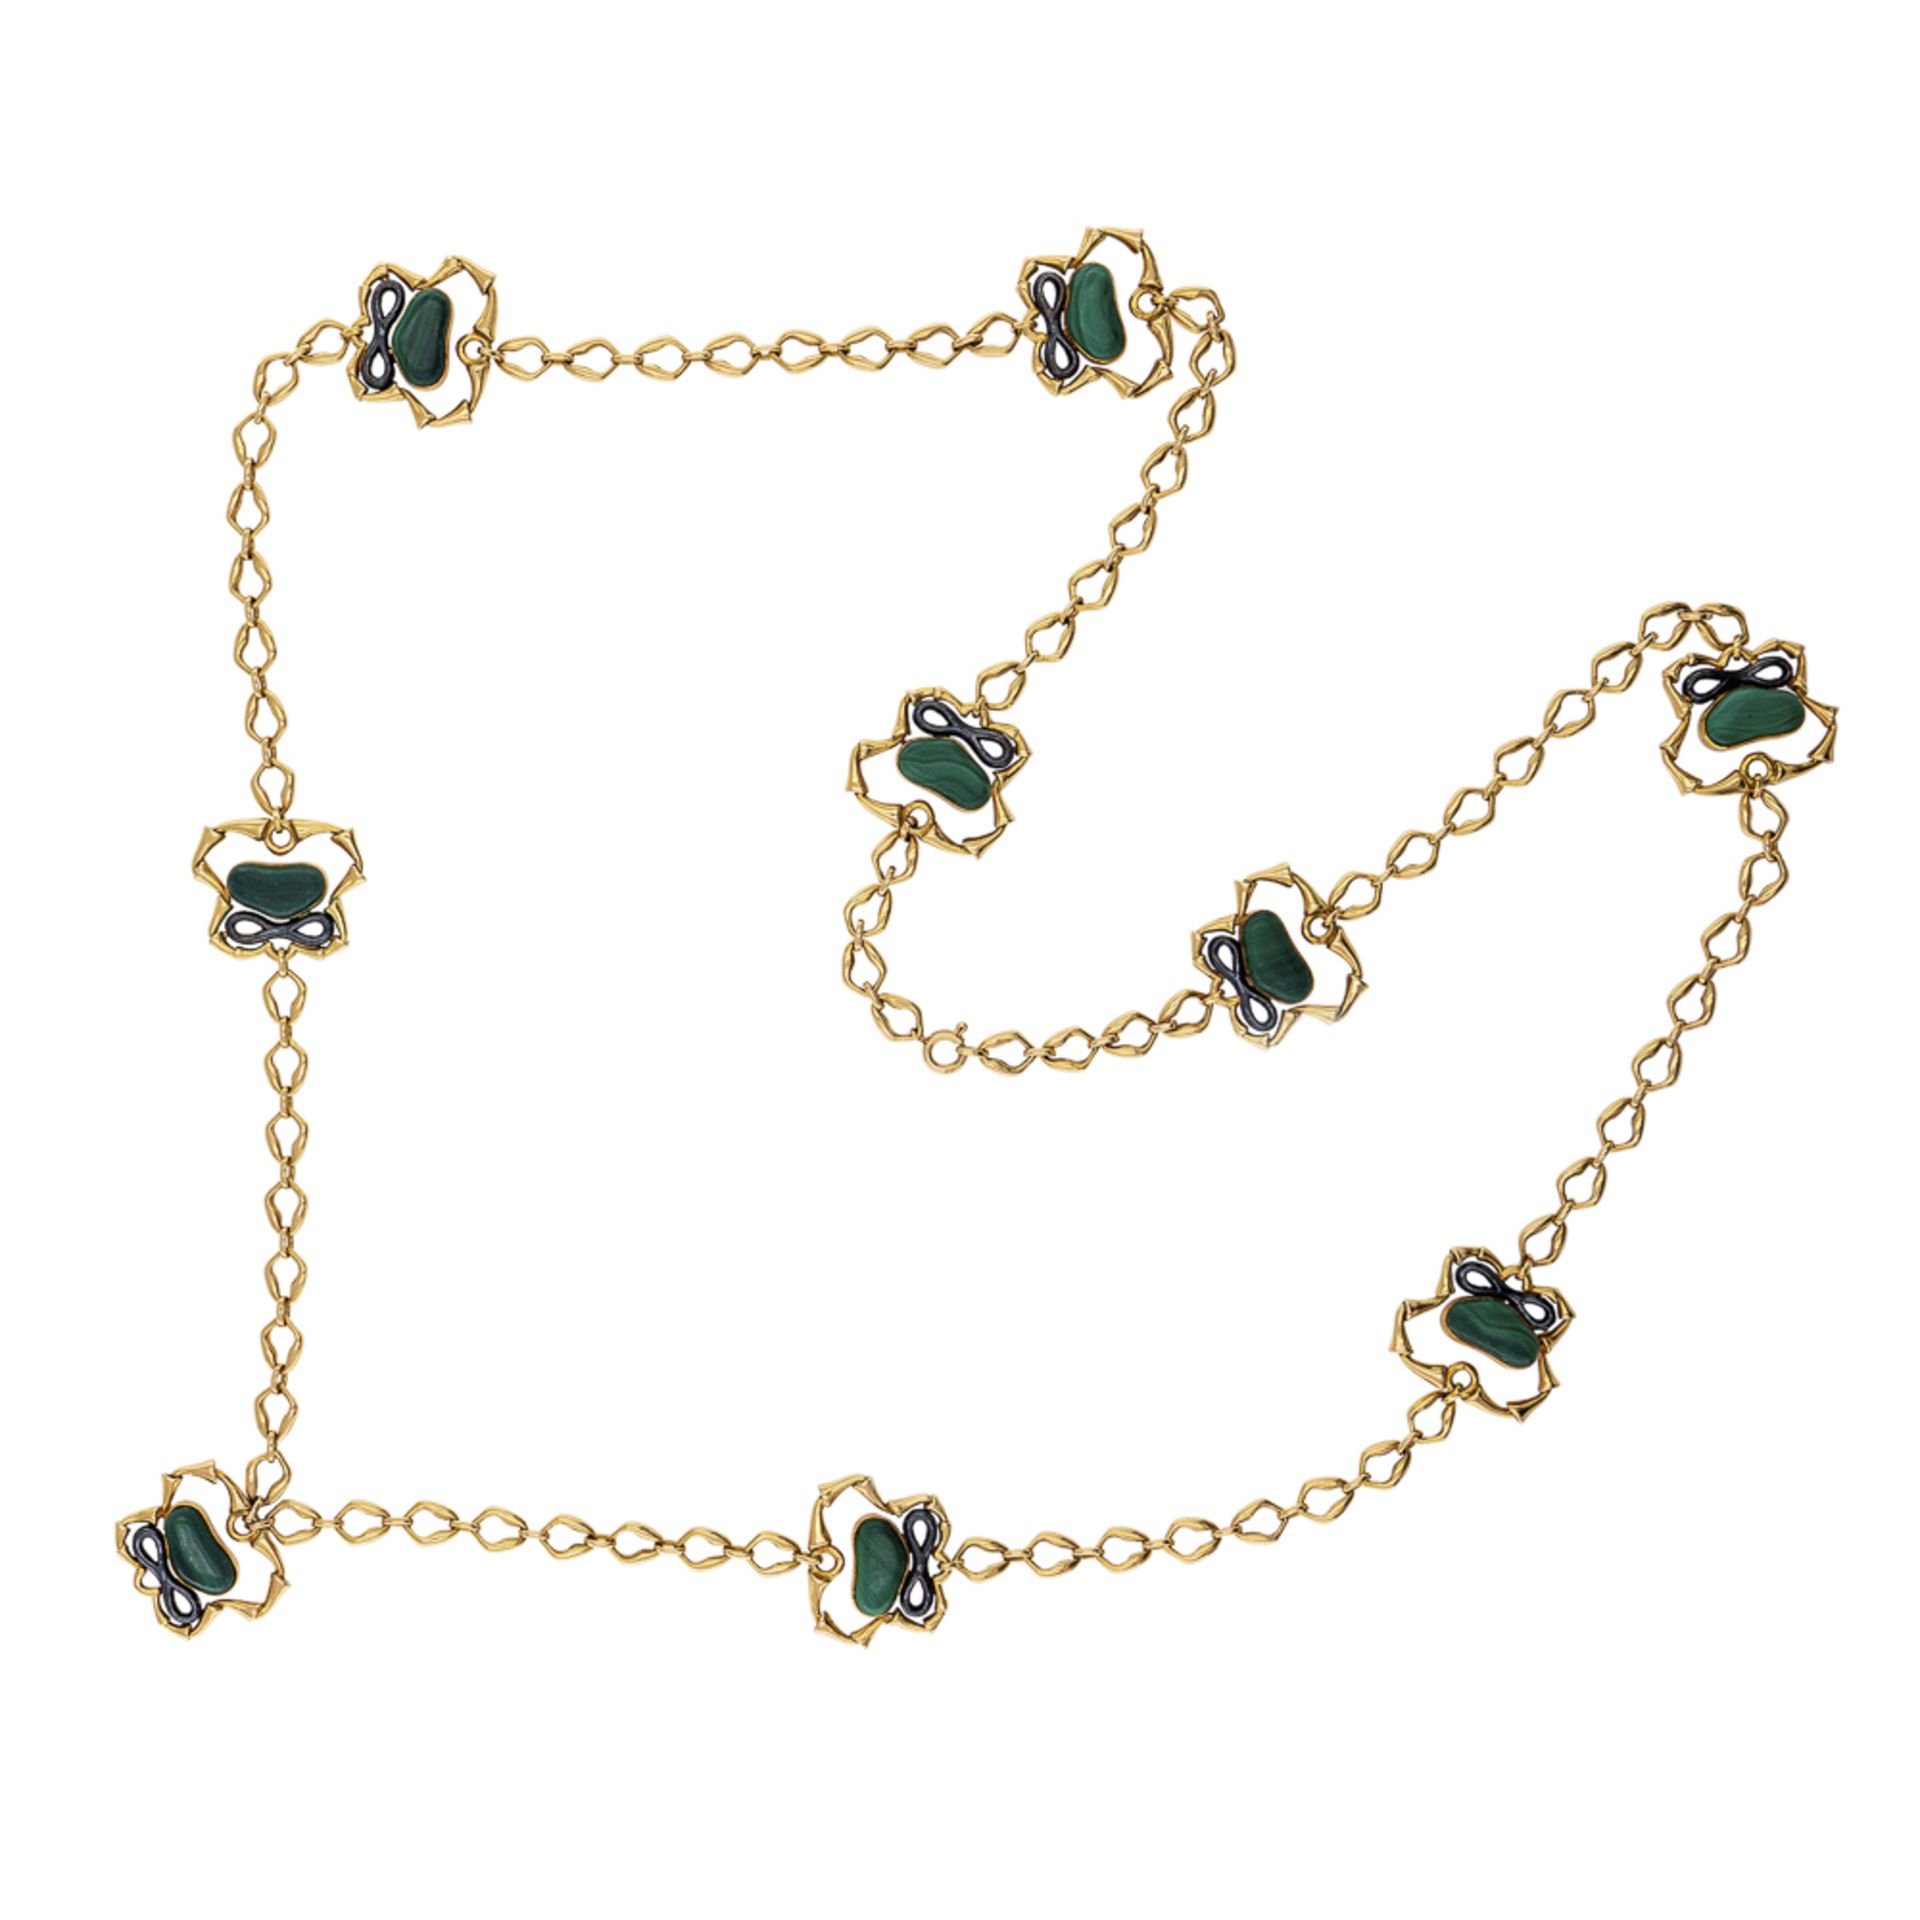 Bulgari long 18kt yellow and burnished gold necklace - Image 2 of 3